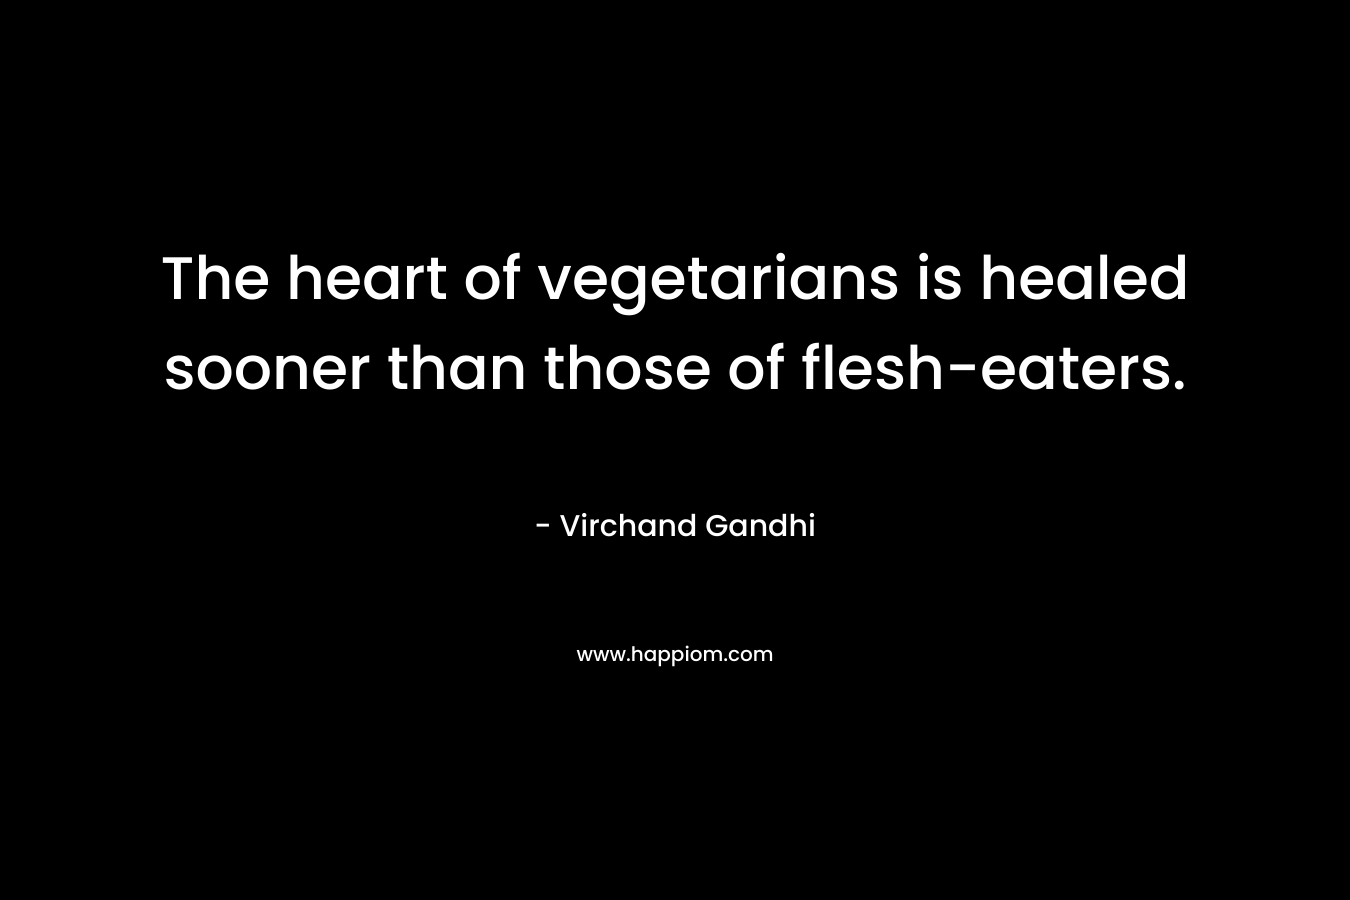 The heart of vegetarians is healed sooner than those of flesh-eaters.